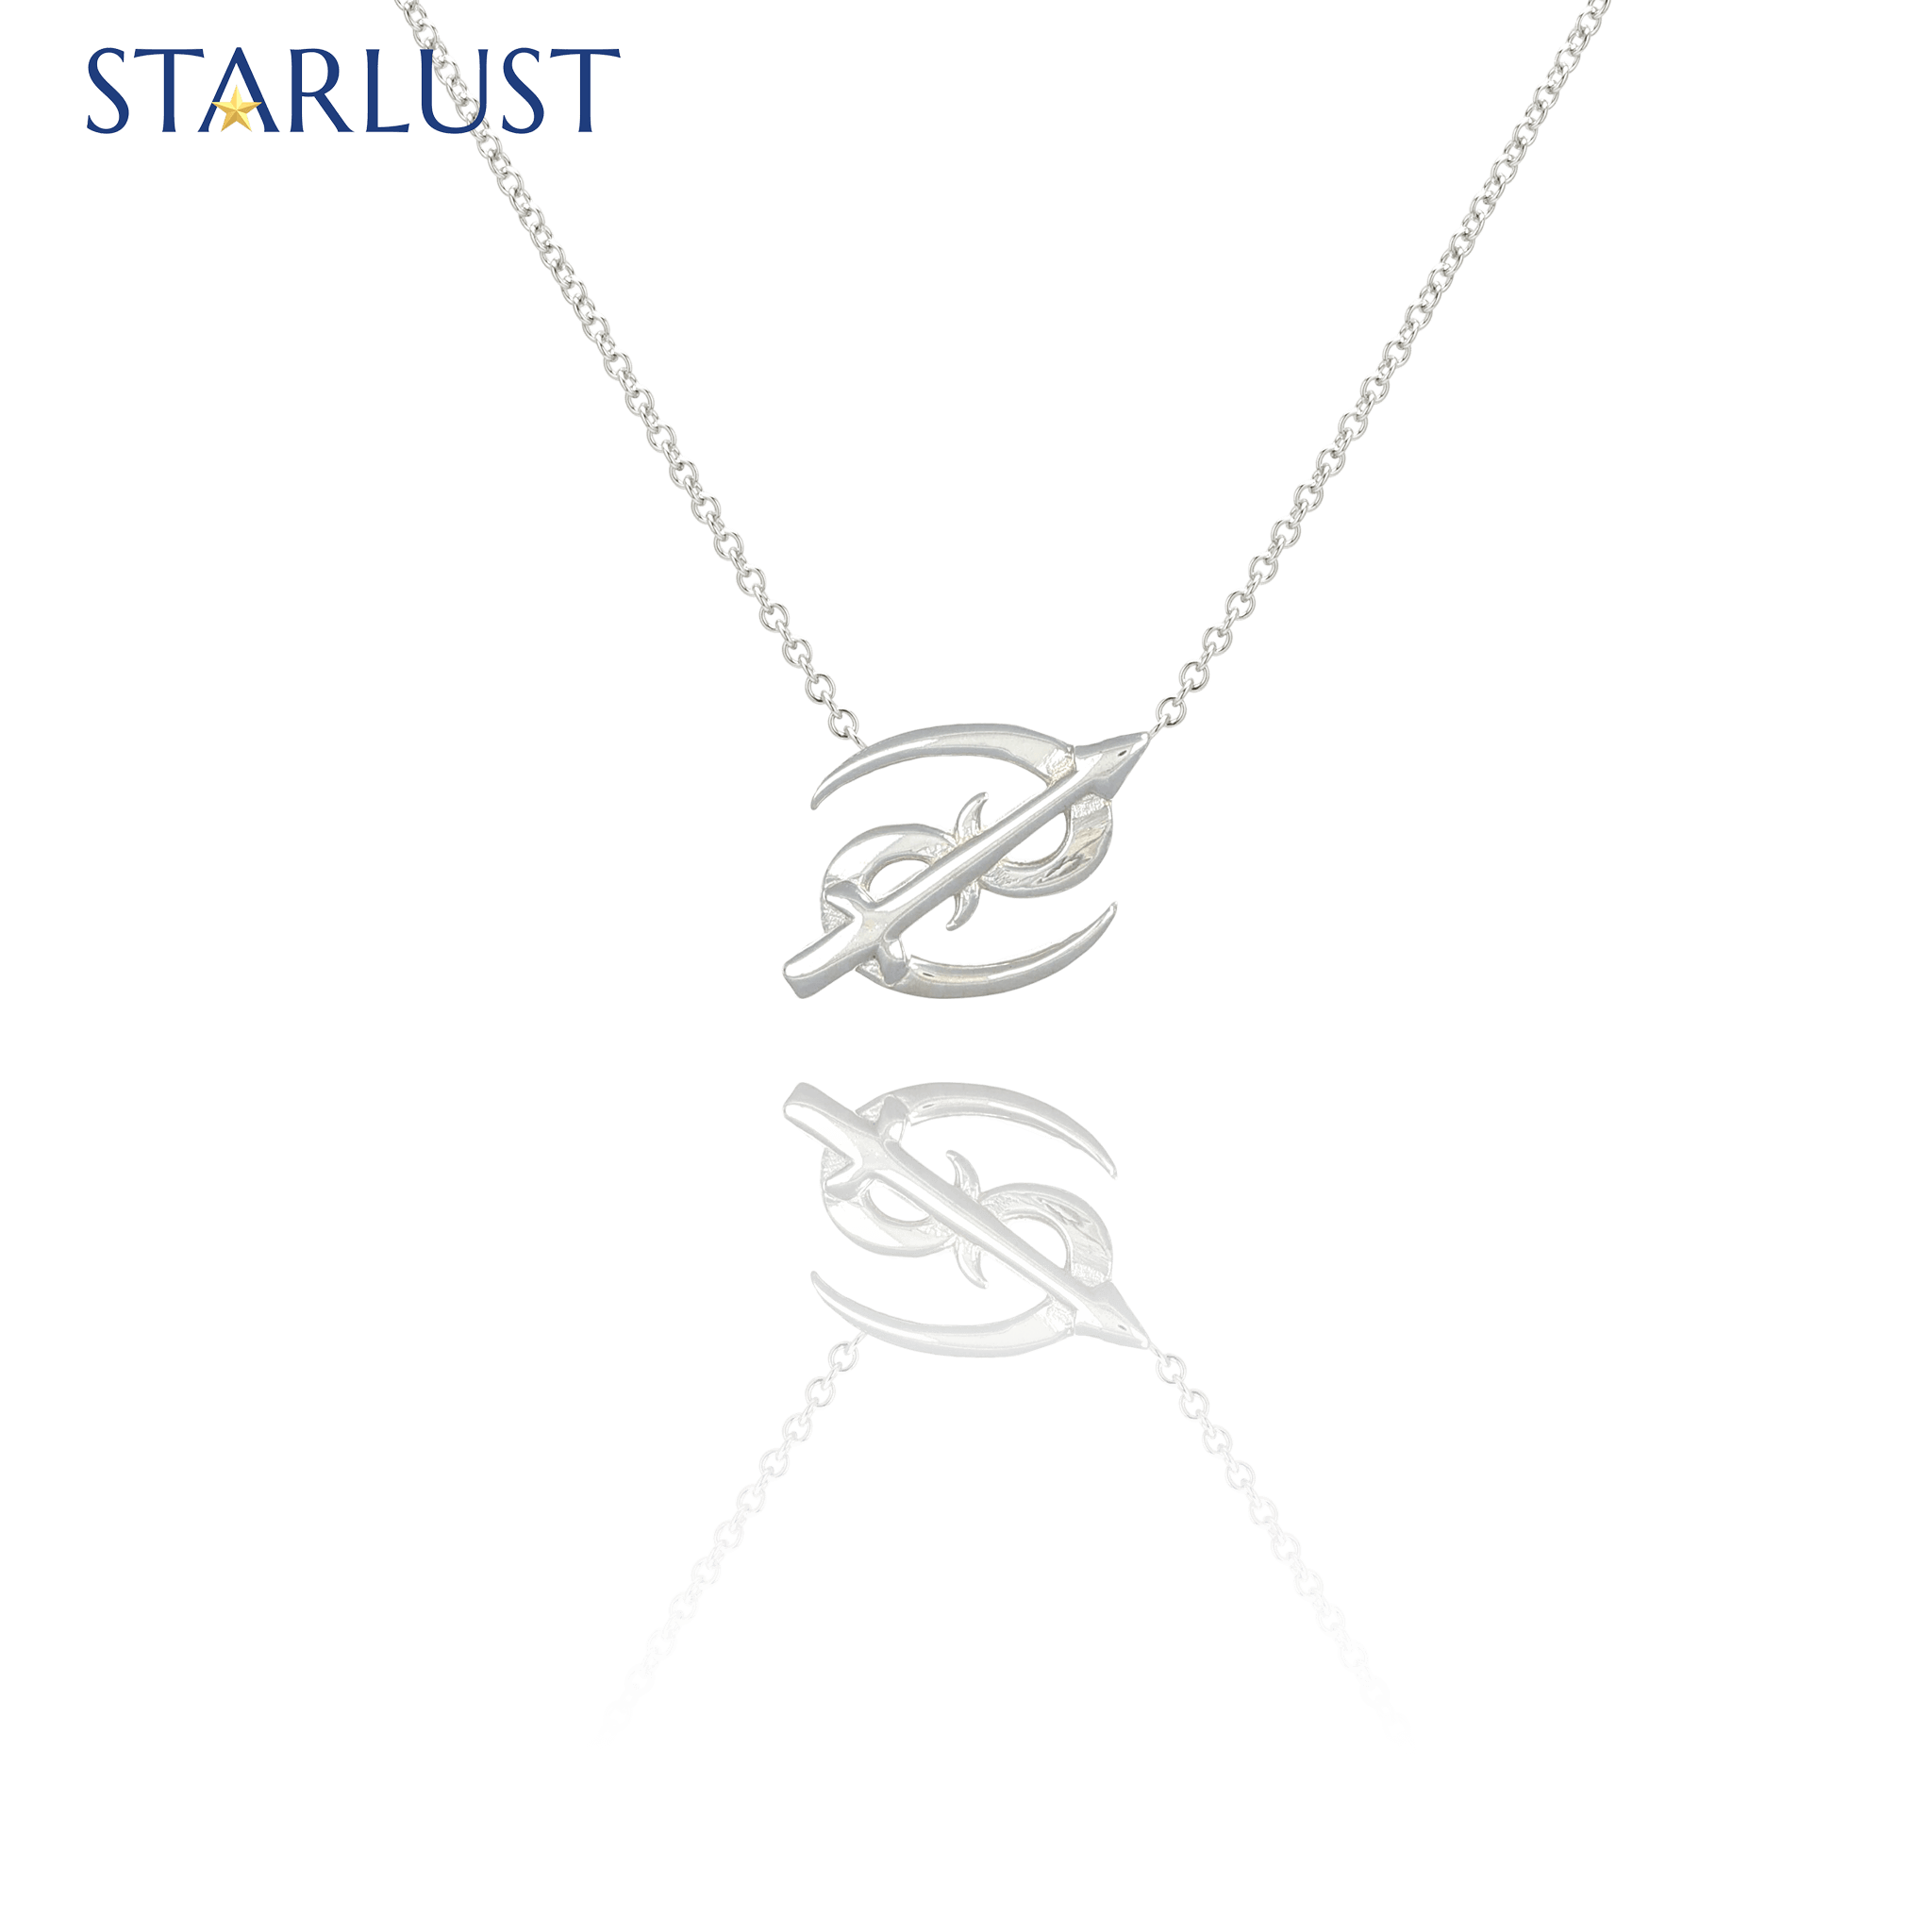 Cancer and Sagittarius Necklace Sterling Silver Starlust